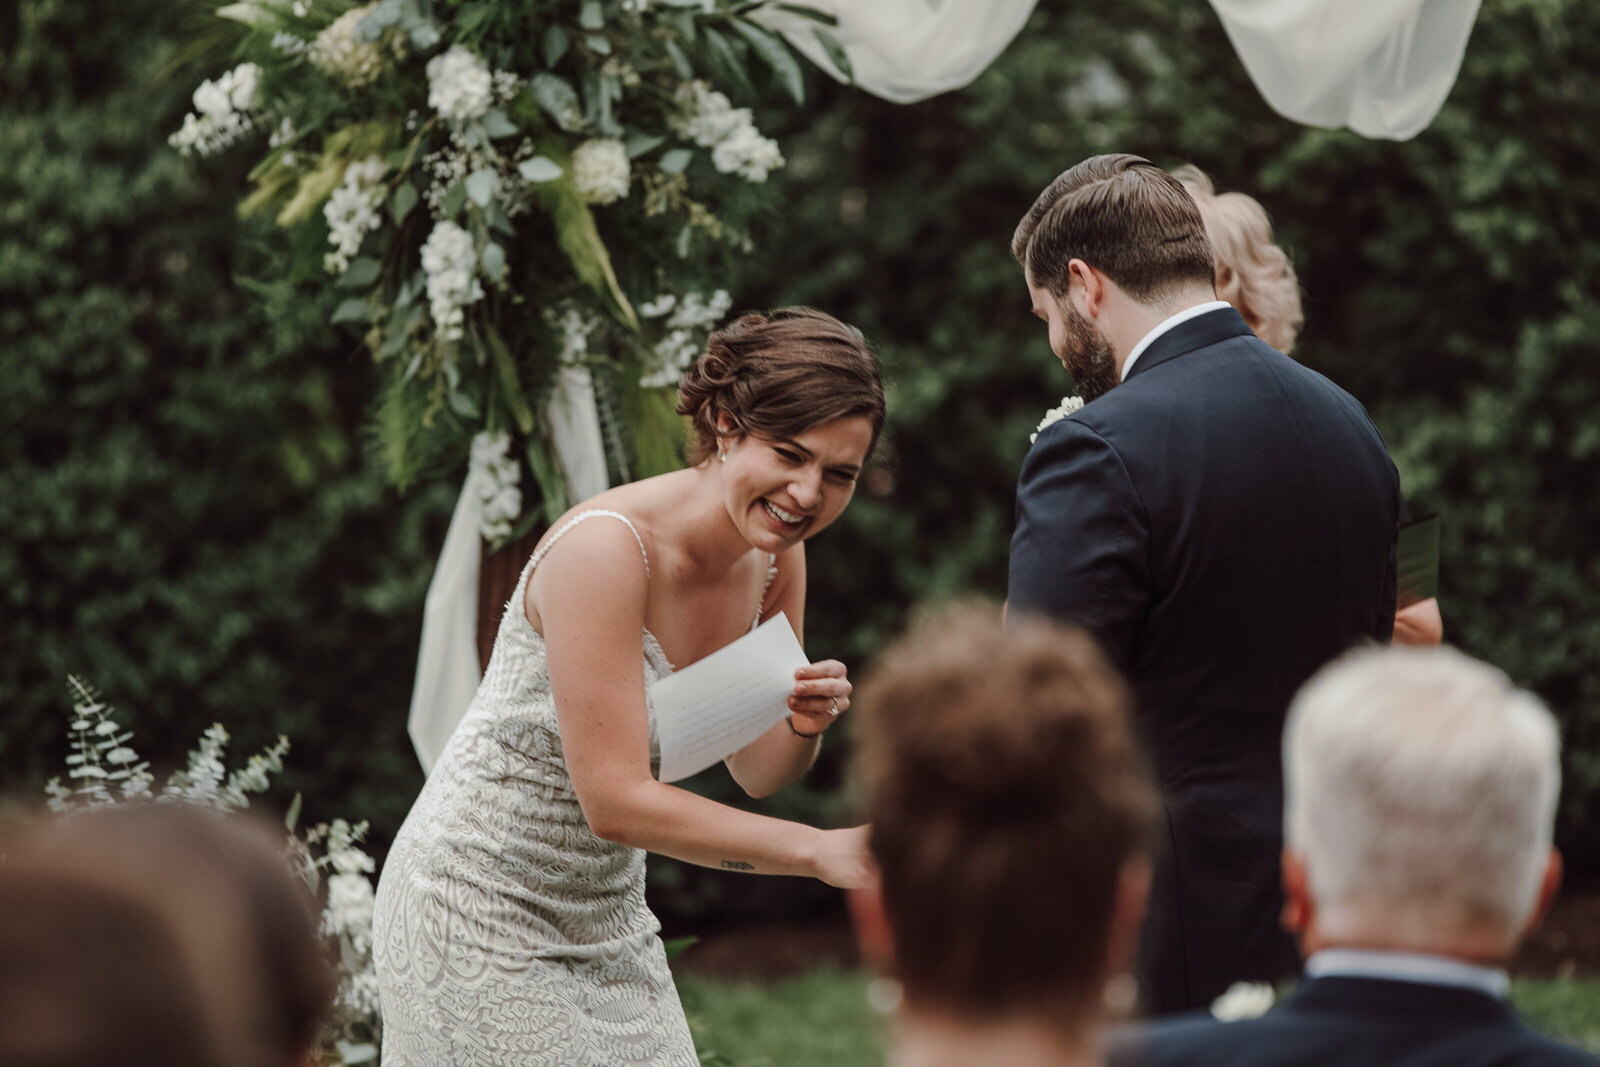 A bride laughs during her backyard wedding ceremony